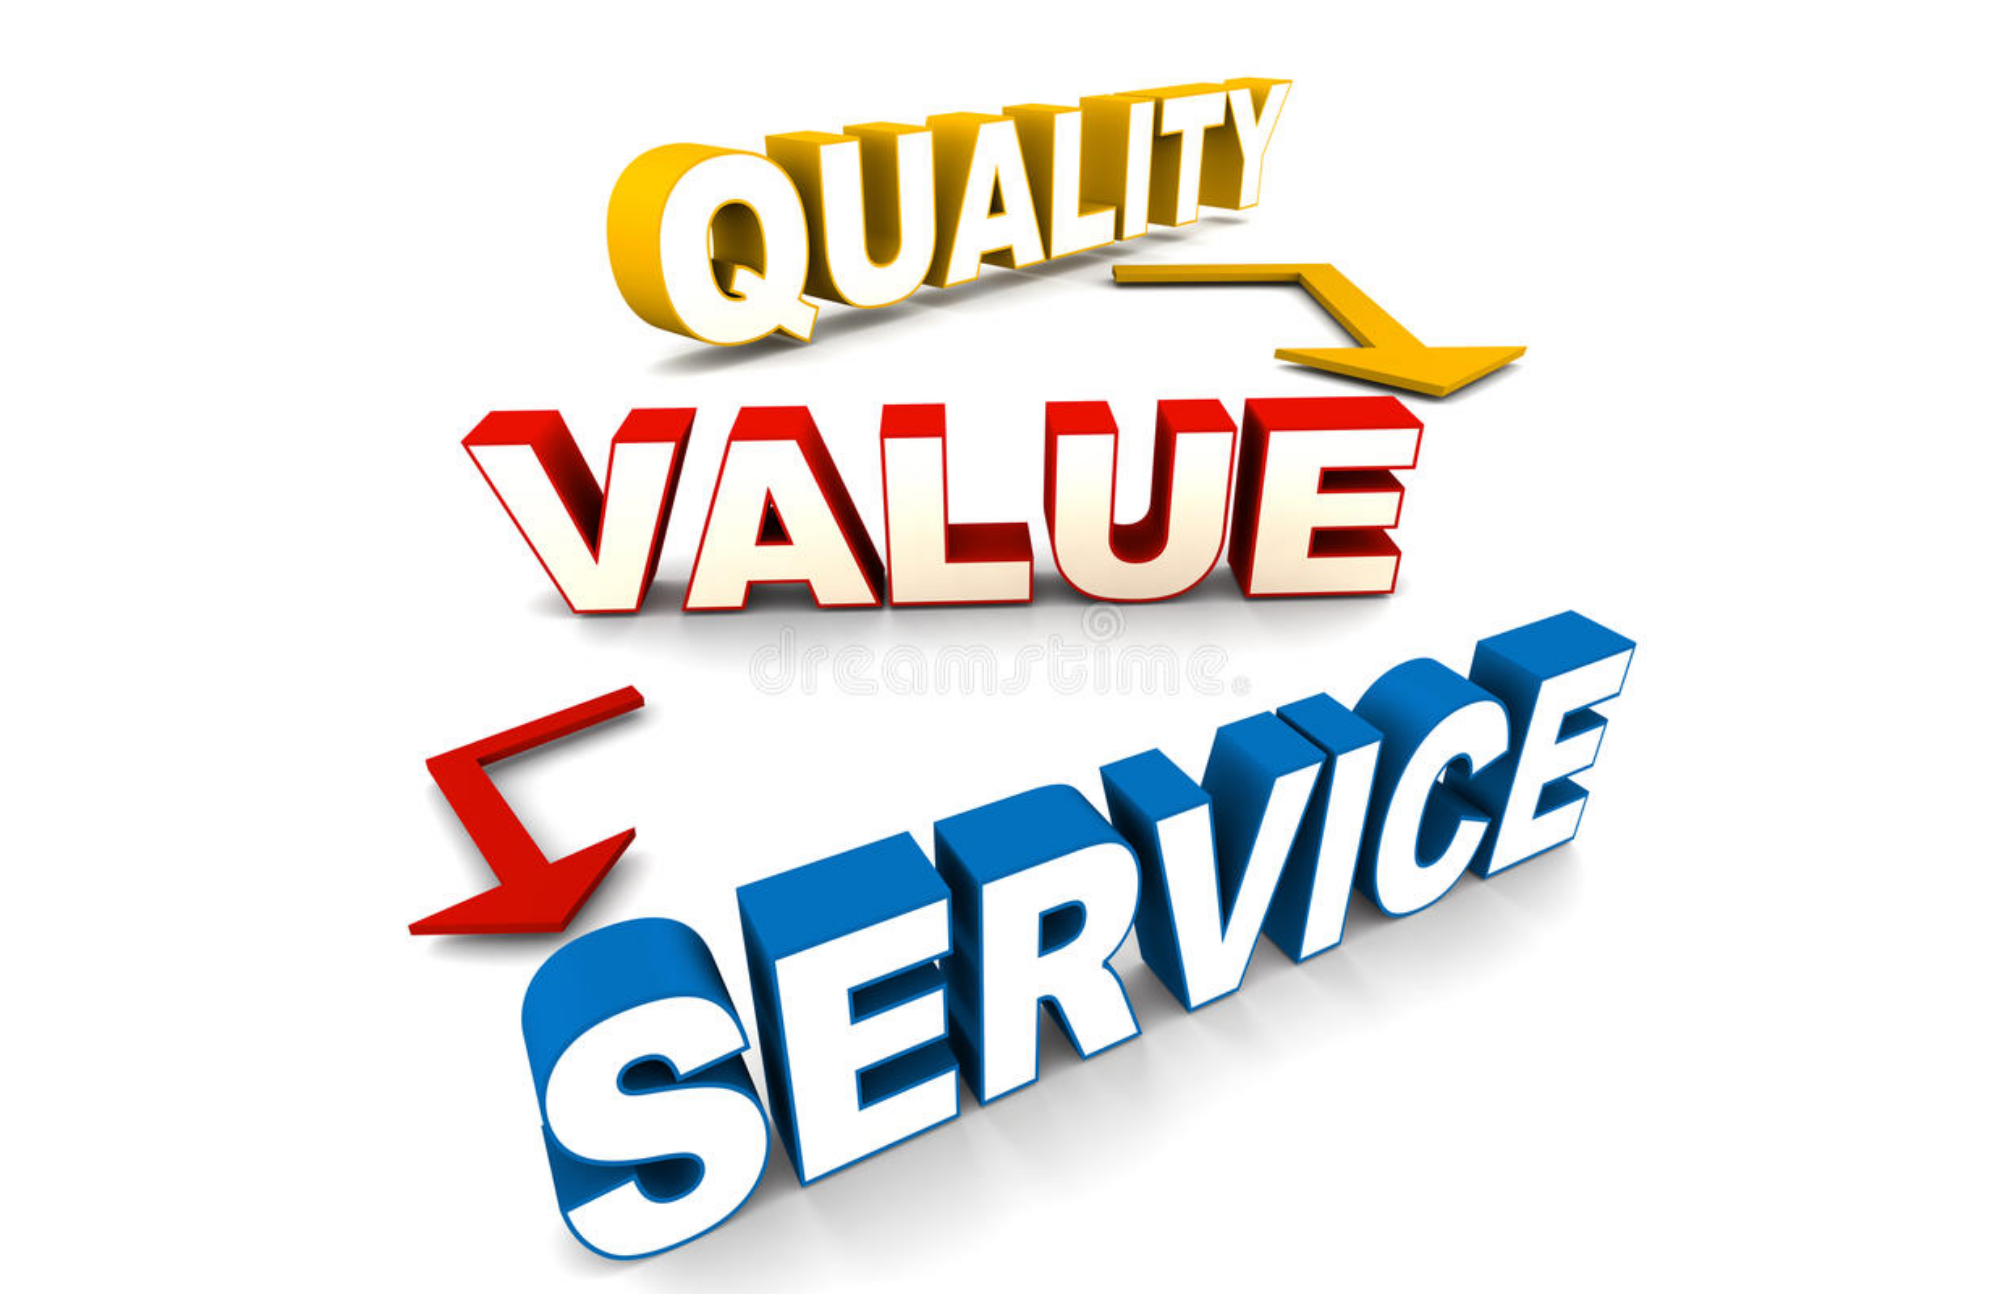 A 3D representation of the words quality, value, and service